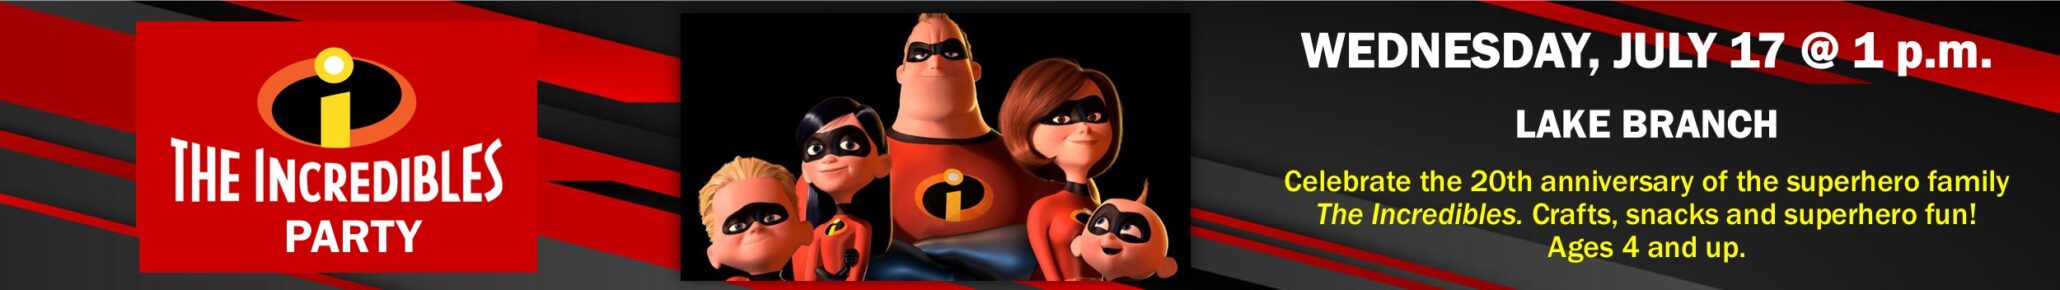 incredibles party at the lake branch on july 17